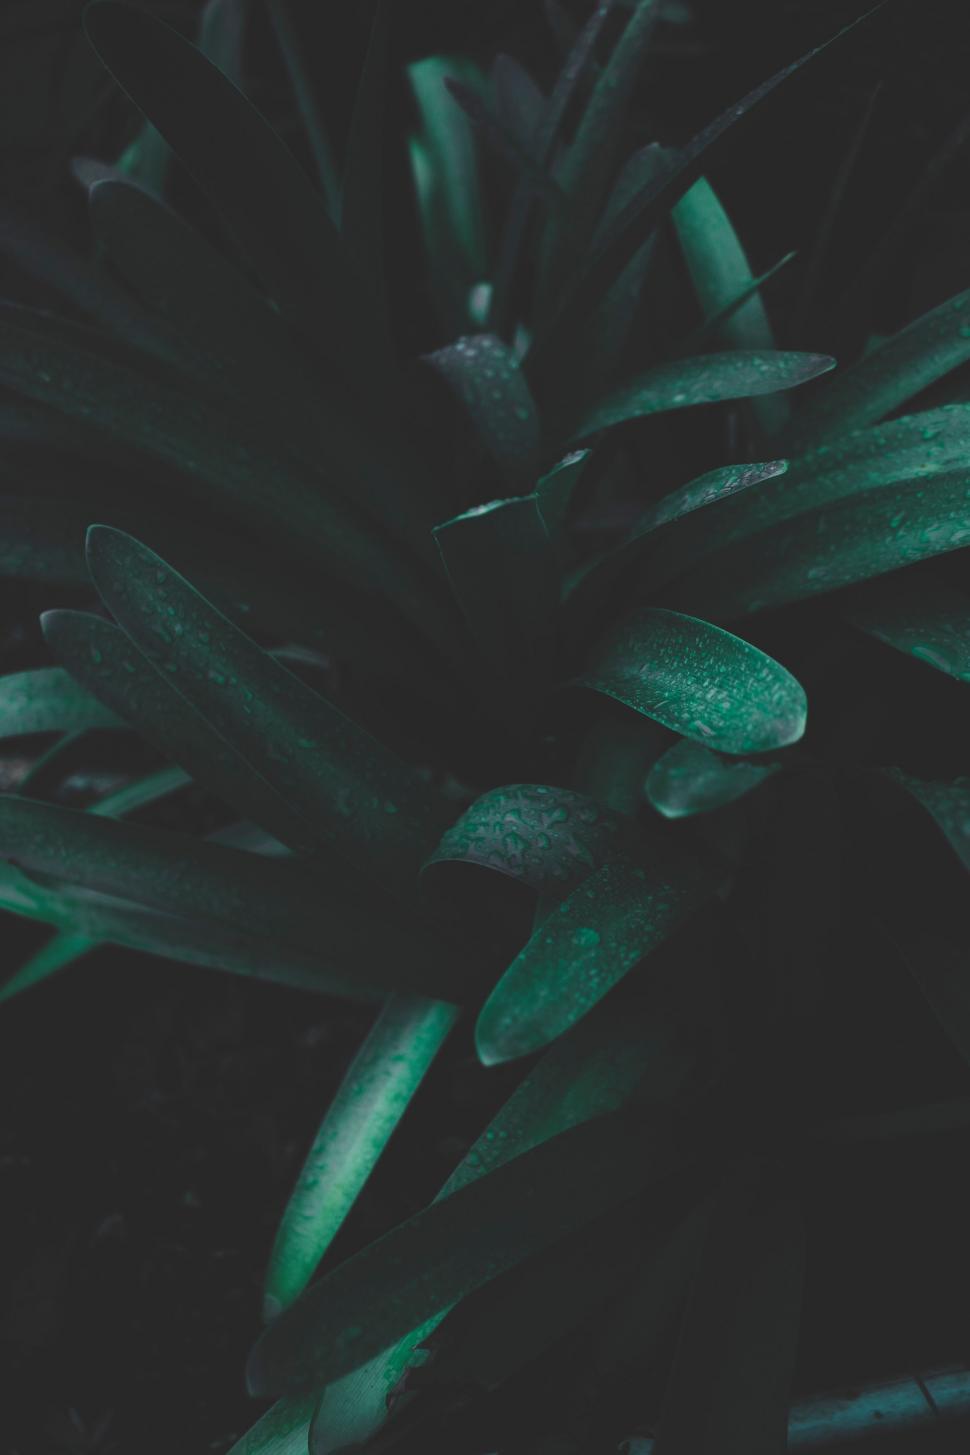 Free Image of Close Up of Plant With Water Droplets 